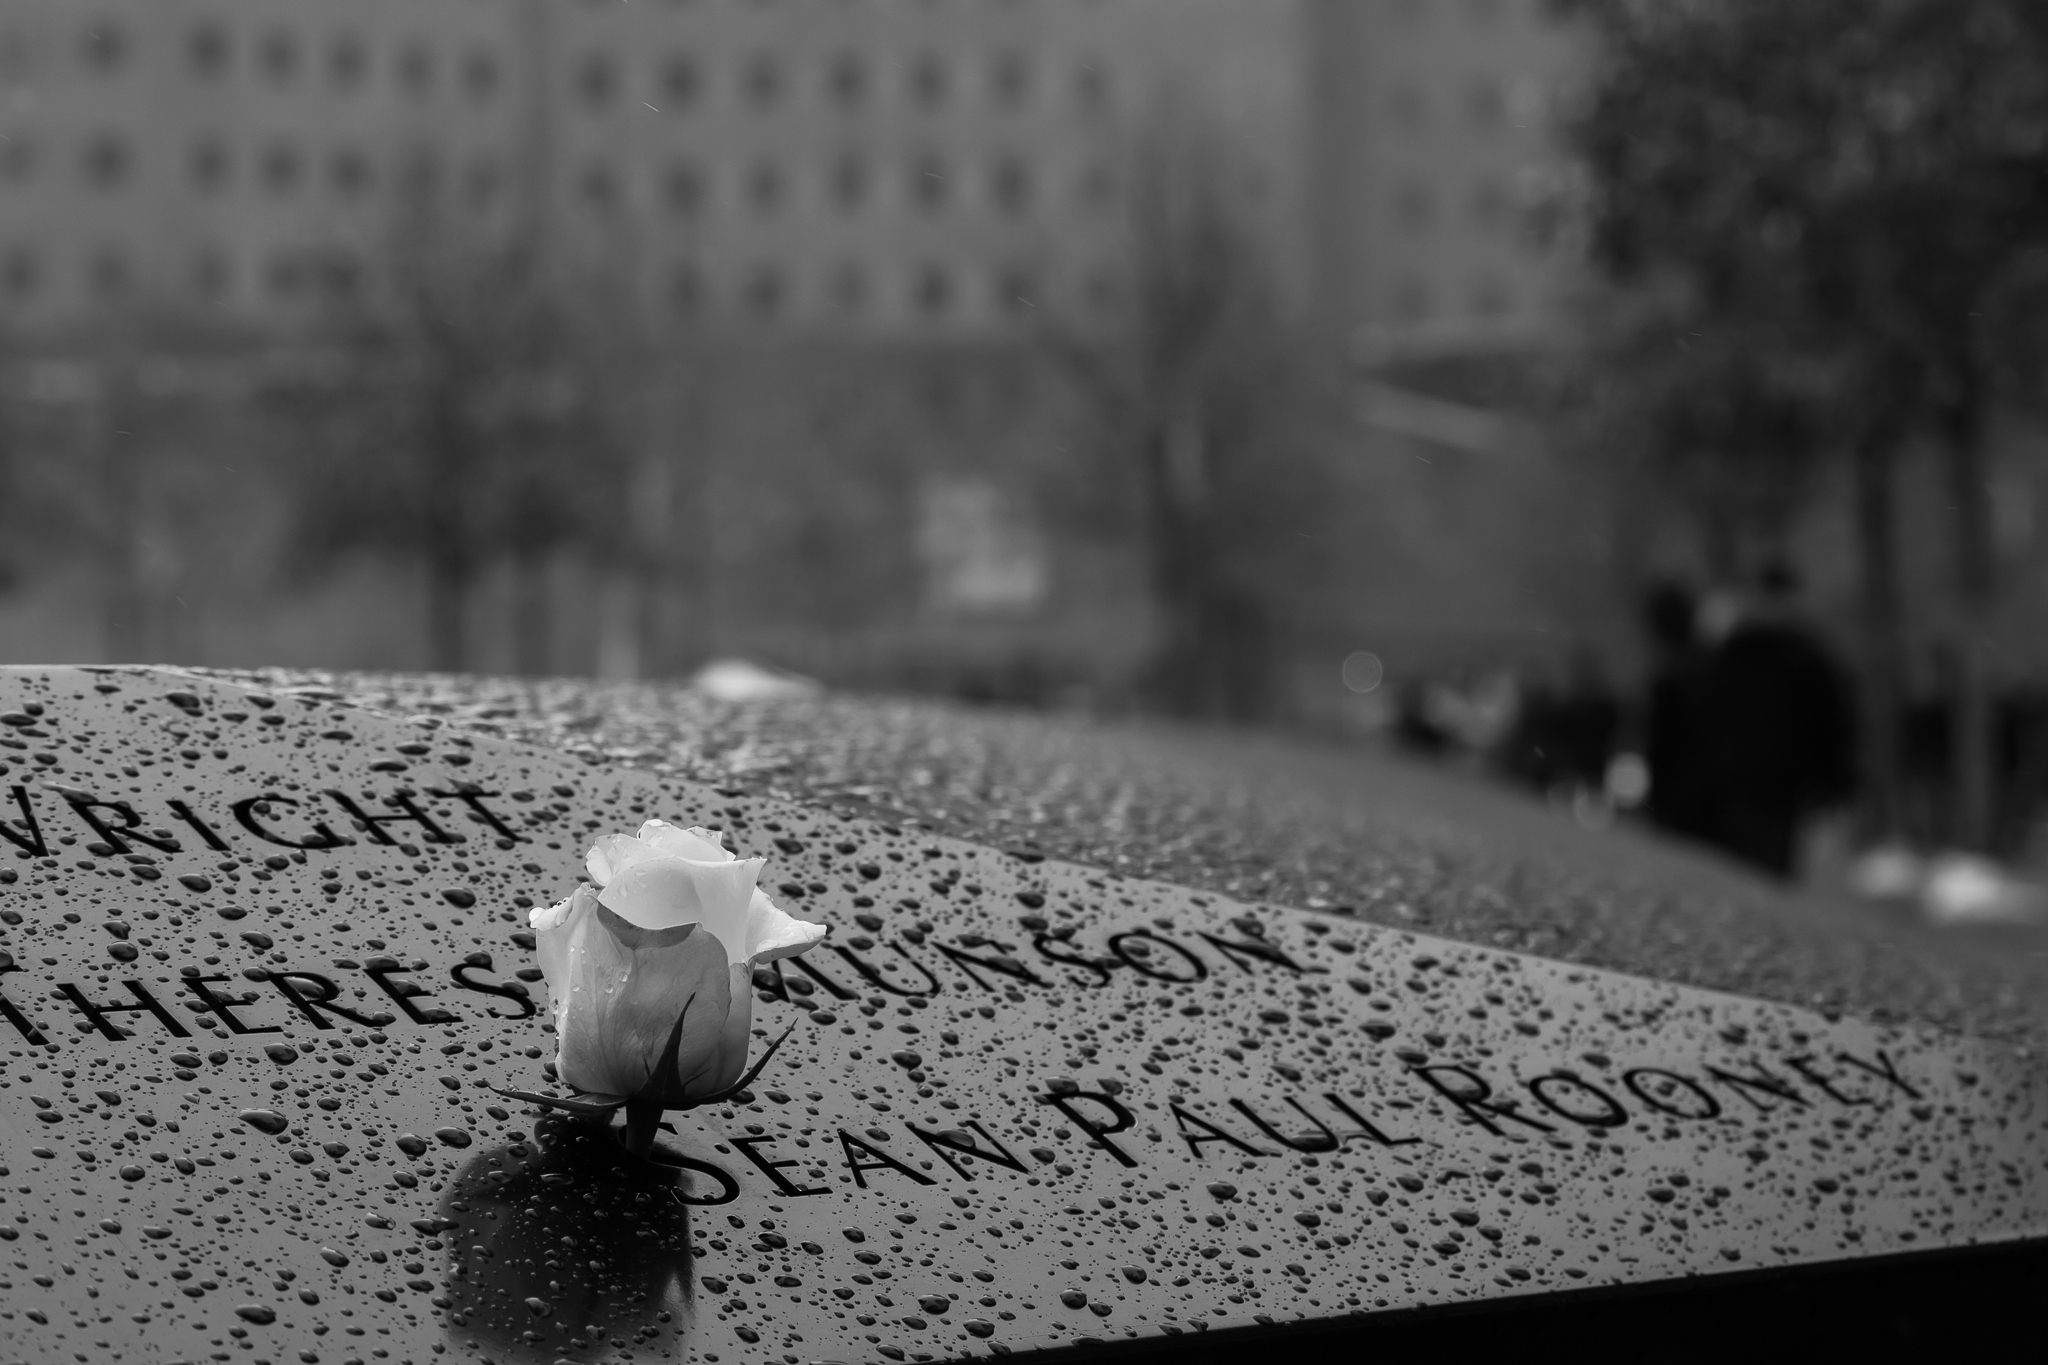 A photo from the National September 11th memorial